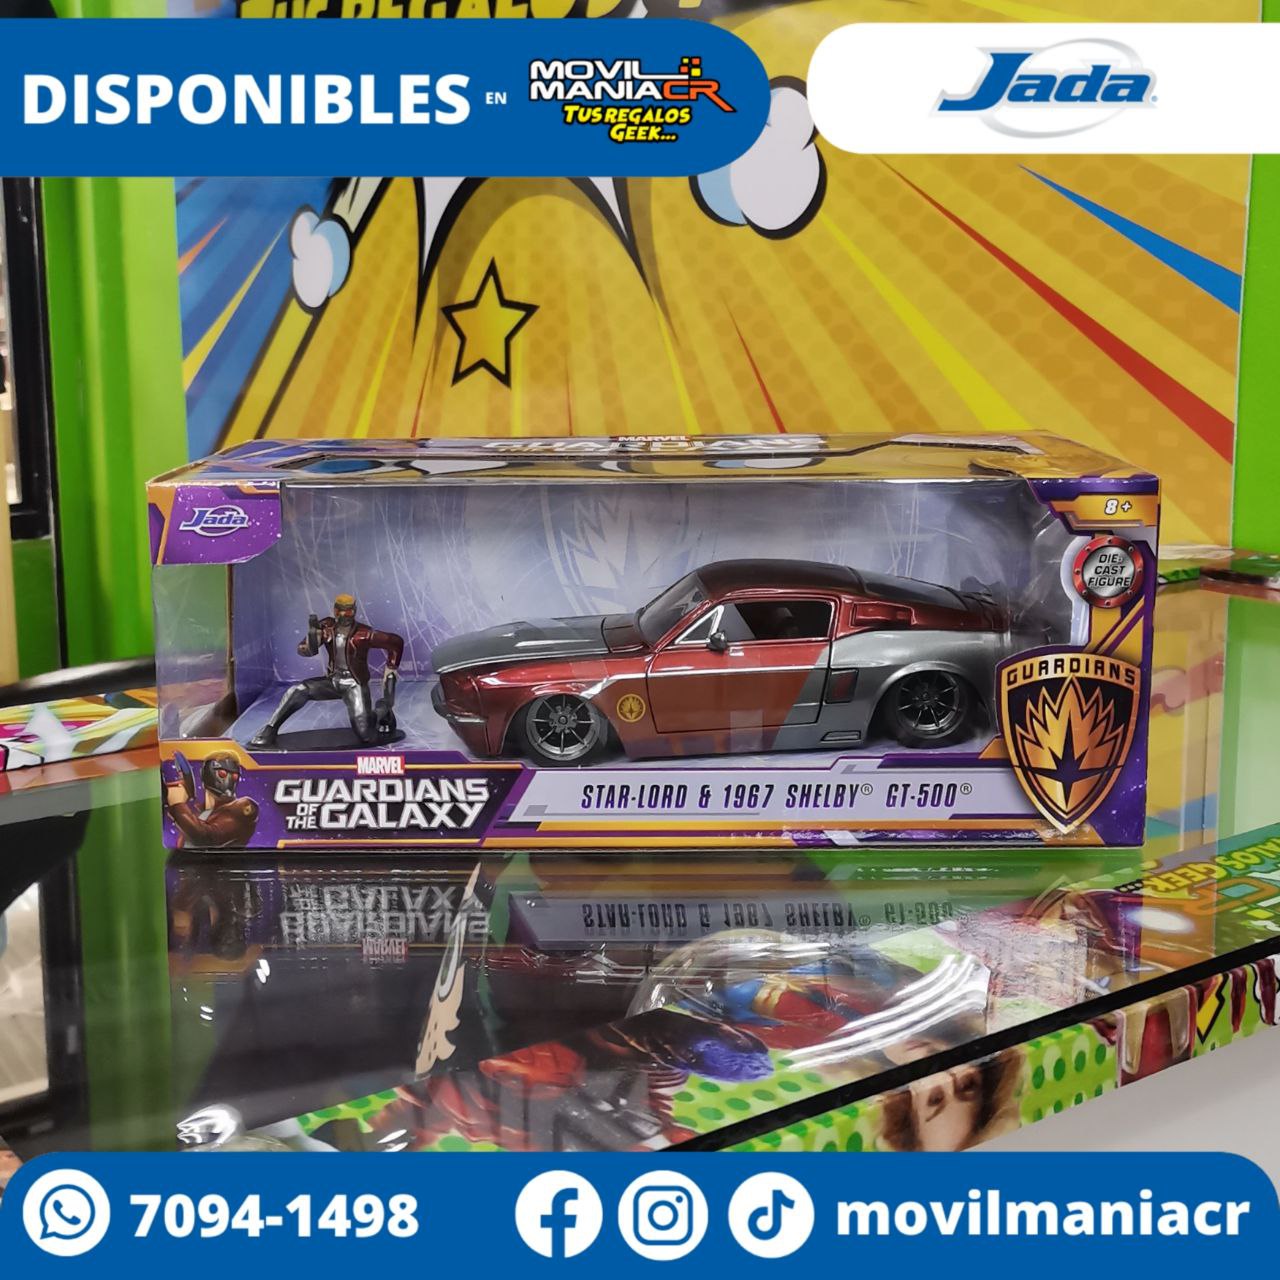 Carro Jada Toys Guardians of the Galaxy Star Lord 1967 Mustang Shelby GT 500 Escala 124 frente 1